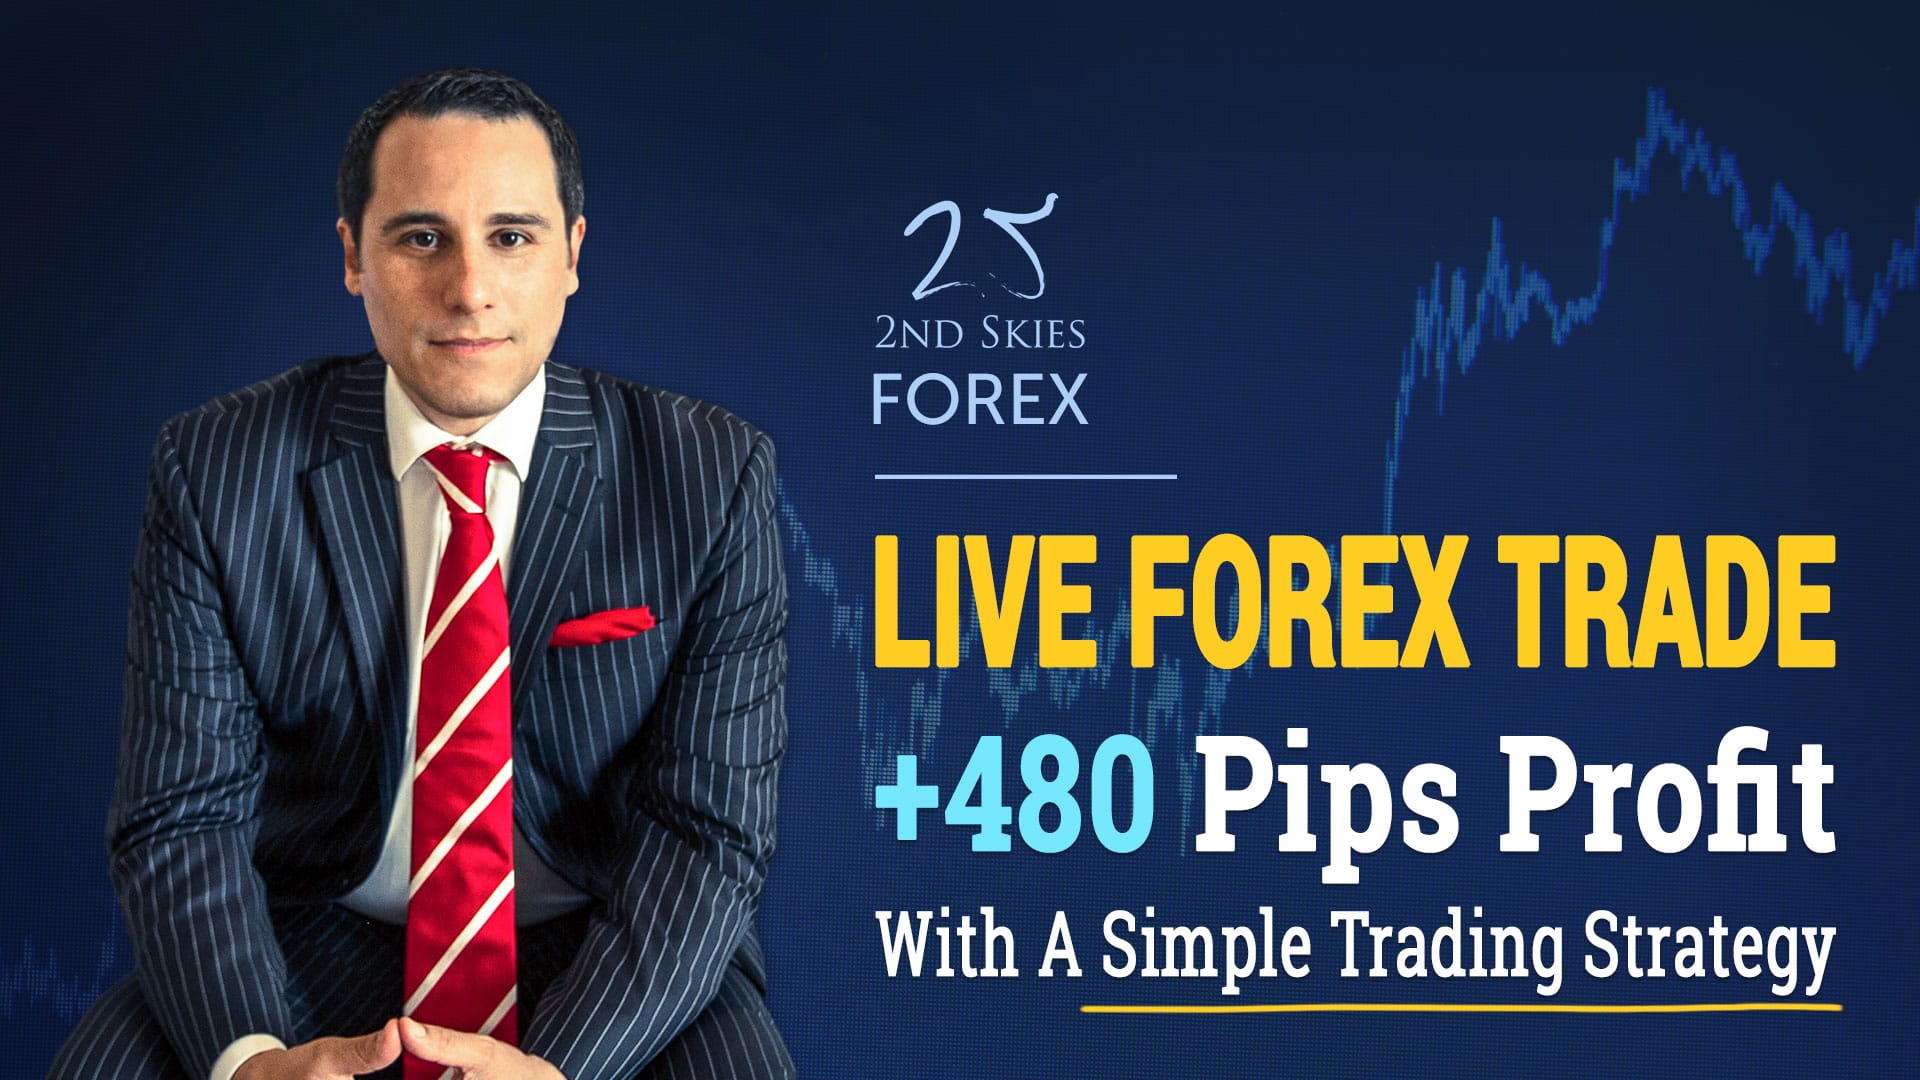 Trade for me forex